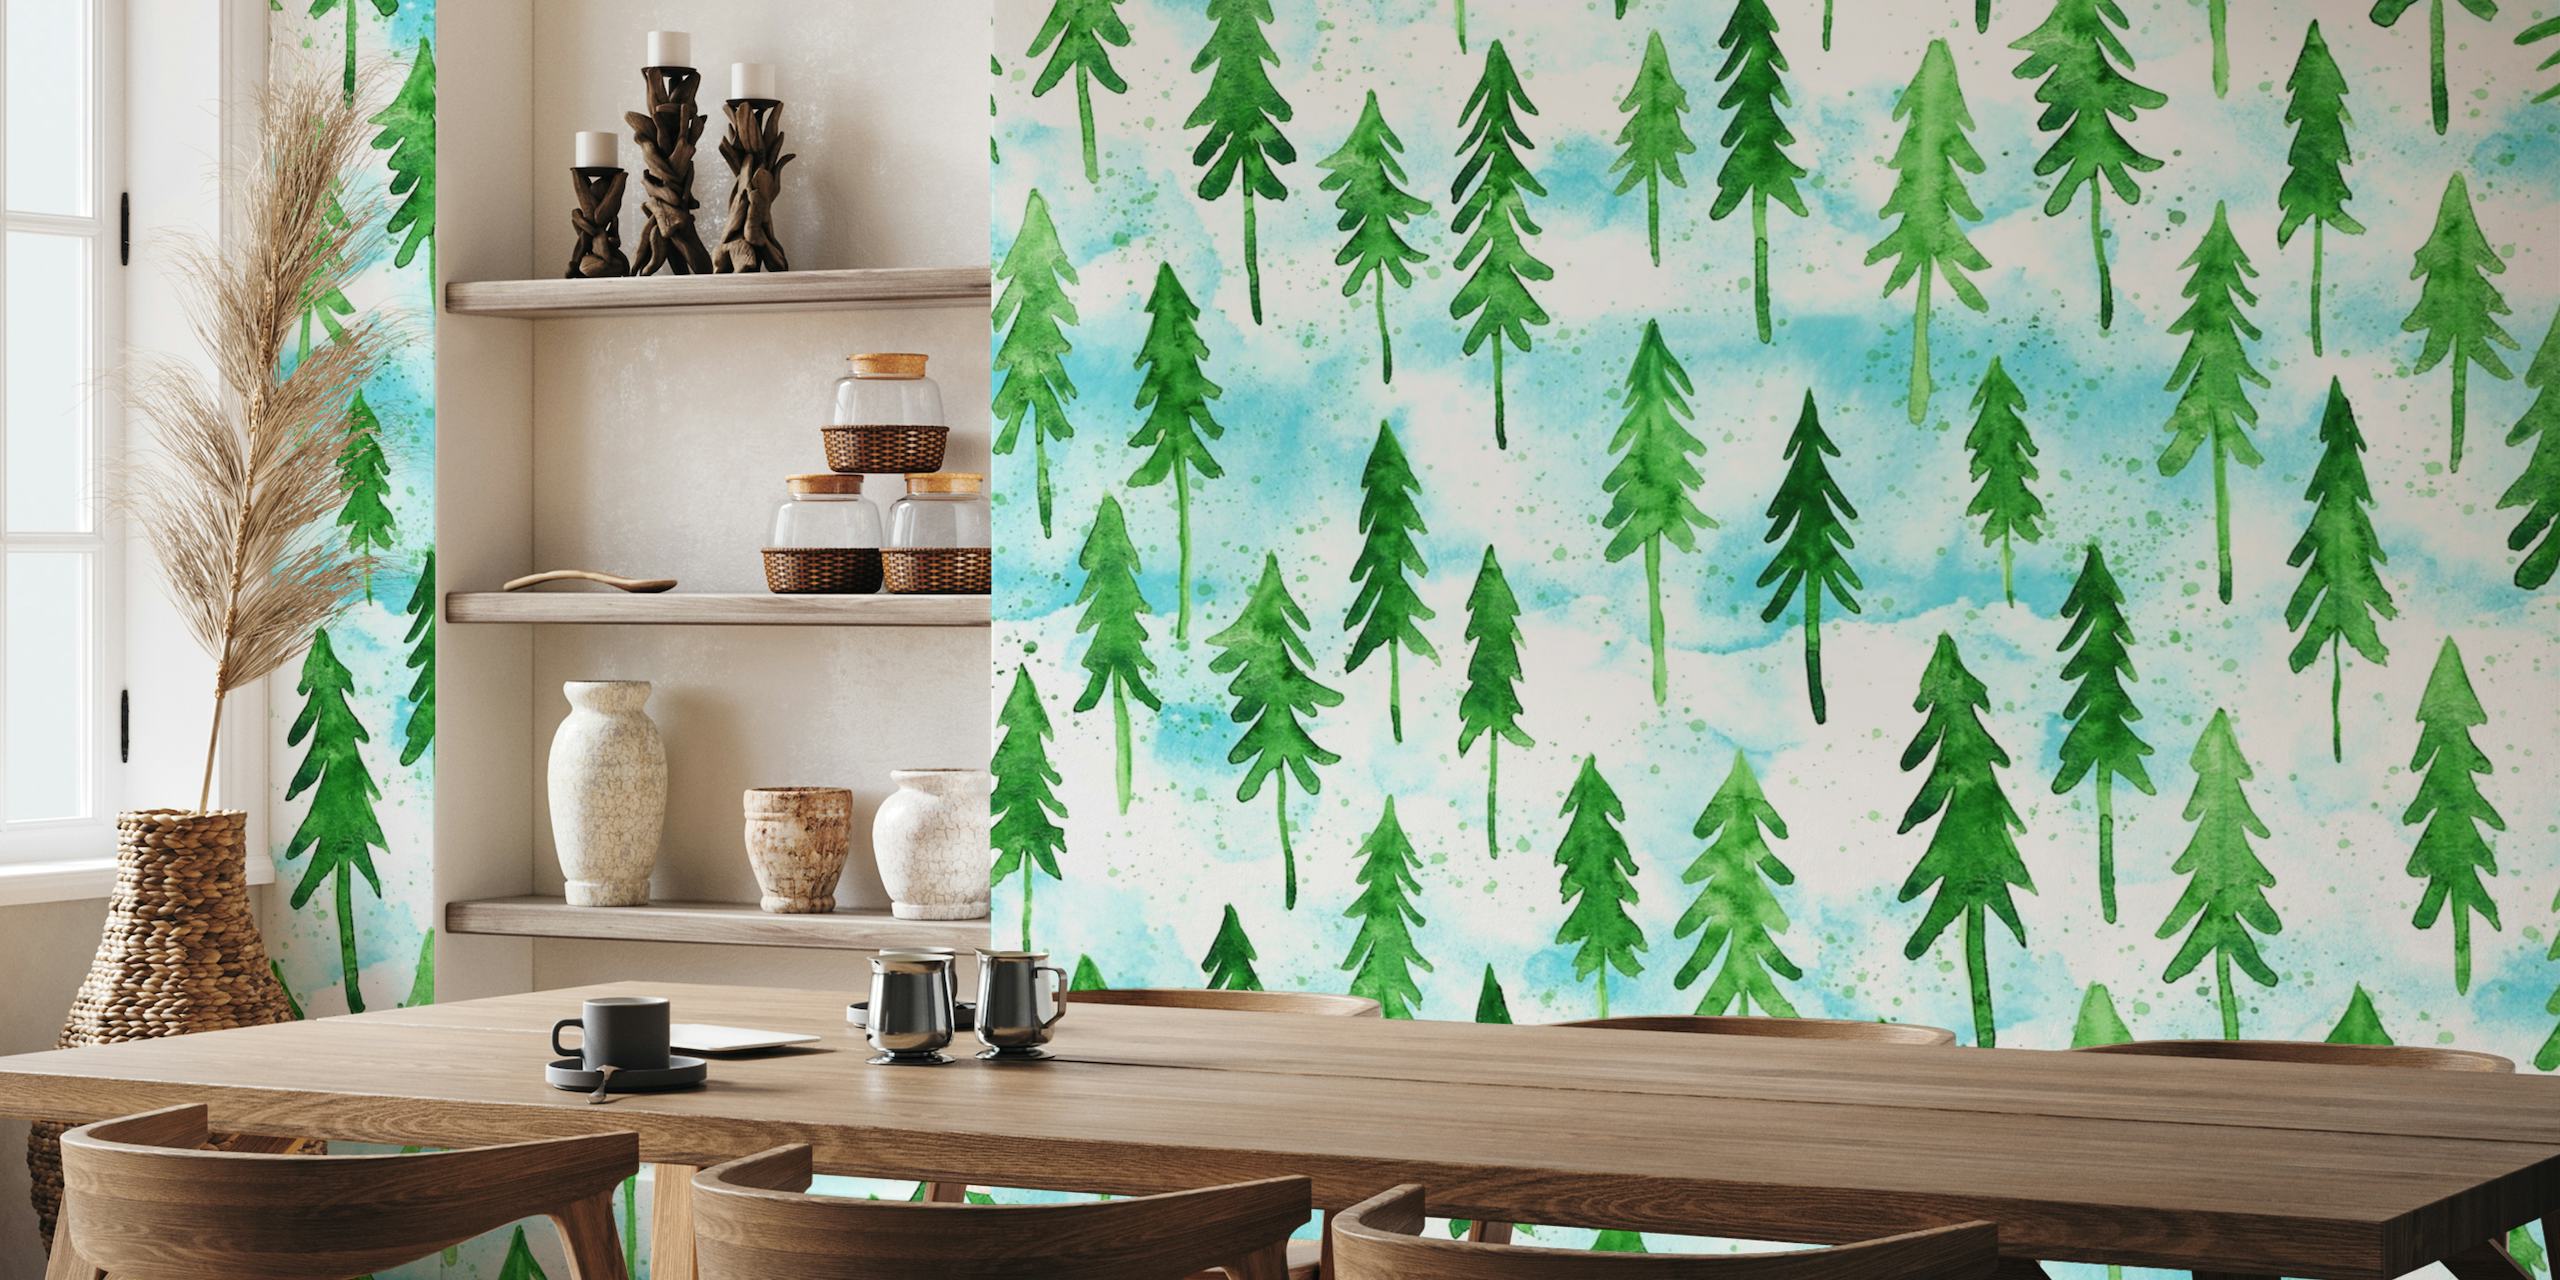 Watercolor pine tree pattern wall mural from Happywall in shades of green and blue.